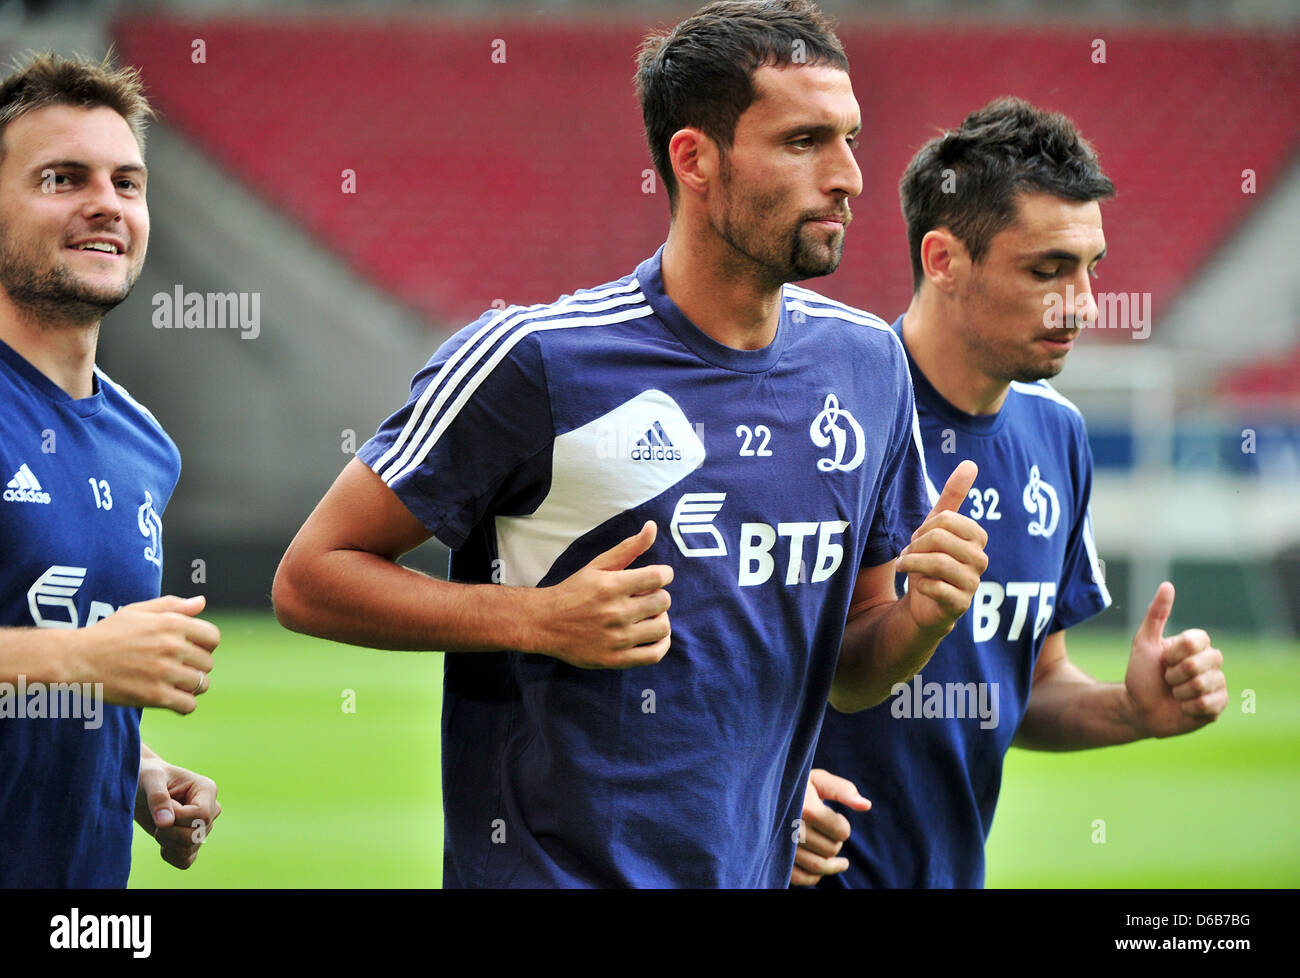 Dynamo Moscow's Vladimir Granat (L-R), Kevin Kuranyi and Marko Lomic practices at the Mercedes Benz Arena in Stuttgart, Germany, 21 August 2012. VfB Stuttgart will play Dynamo Moscow in the first leg of the fourth round of the qualifications for the Europa League on 22 August 2012. Photo: JAN-PHILIPP STROBEL Stock Photo